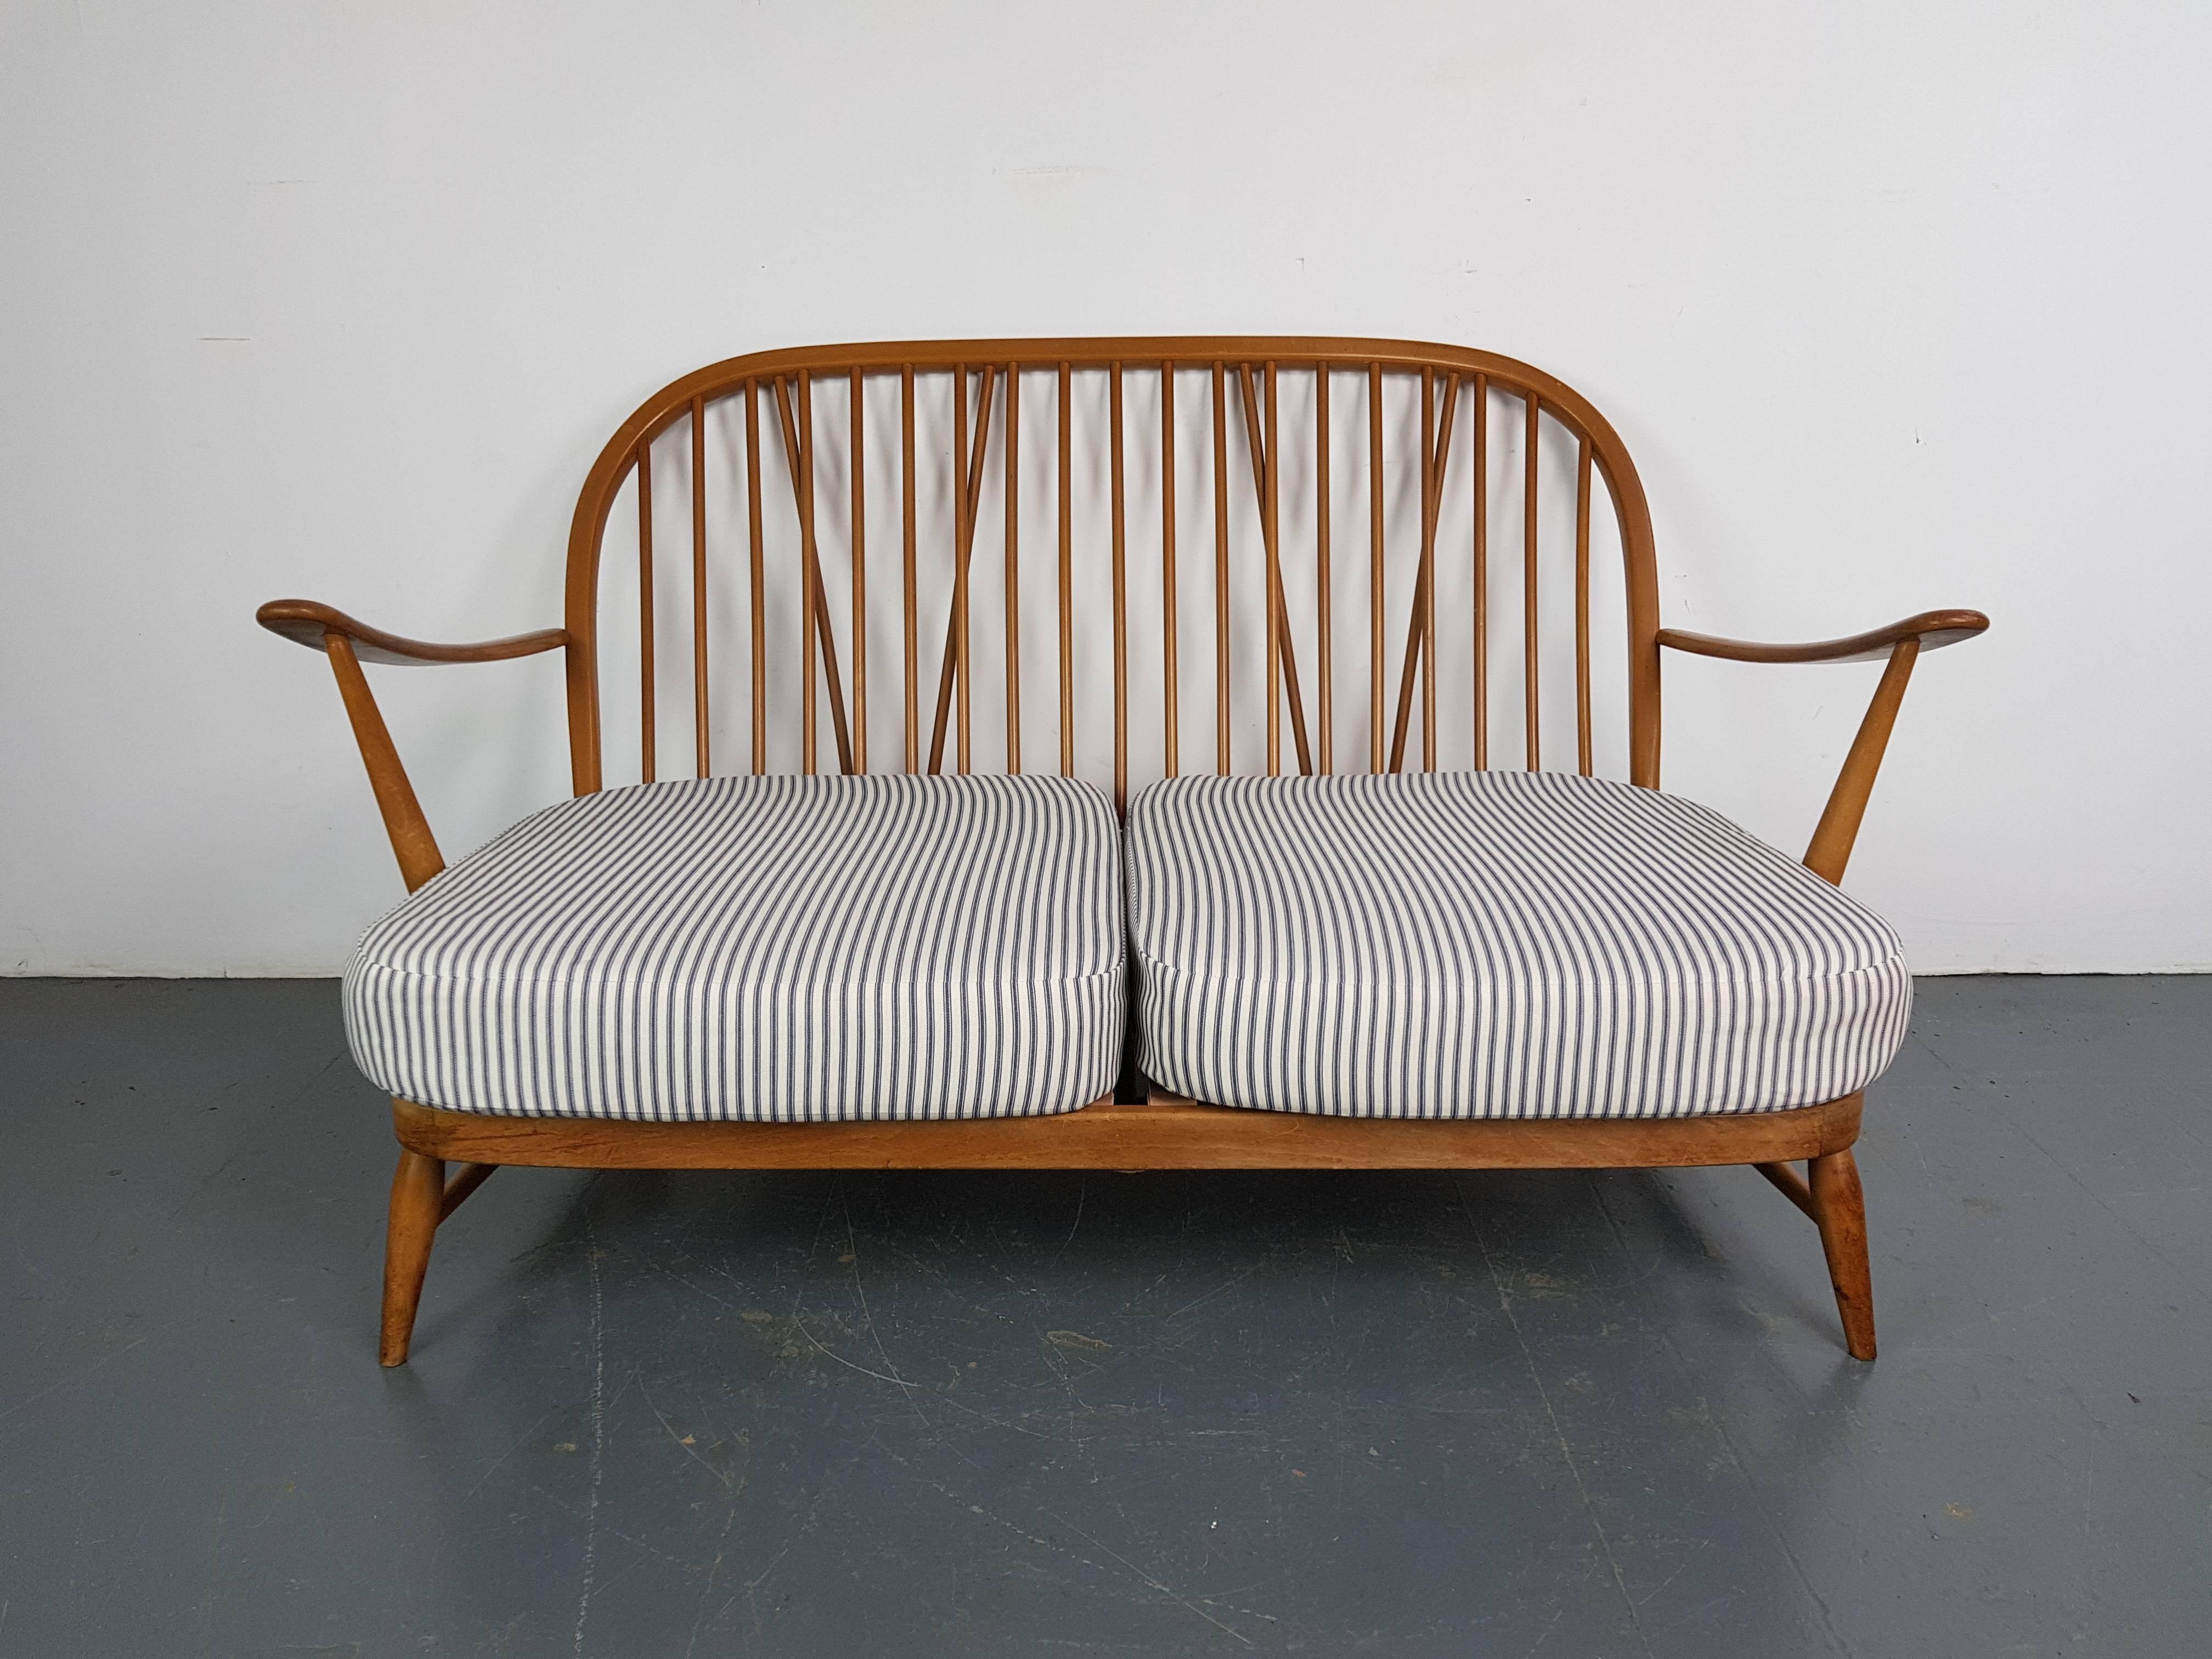 Refurbished blonde Ercol Windsor two-seat sofa.

Newly upholstered in lovely French ticking. 

This piece is in good vintage condition.  The frame is solid and sturdy.  There are a few scuffs, scratches and marks commensurate with age but